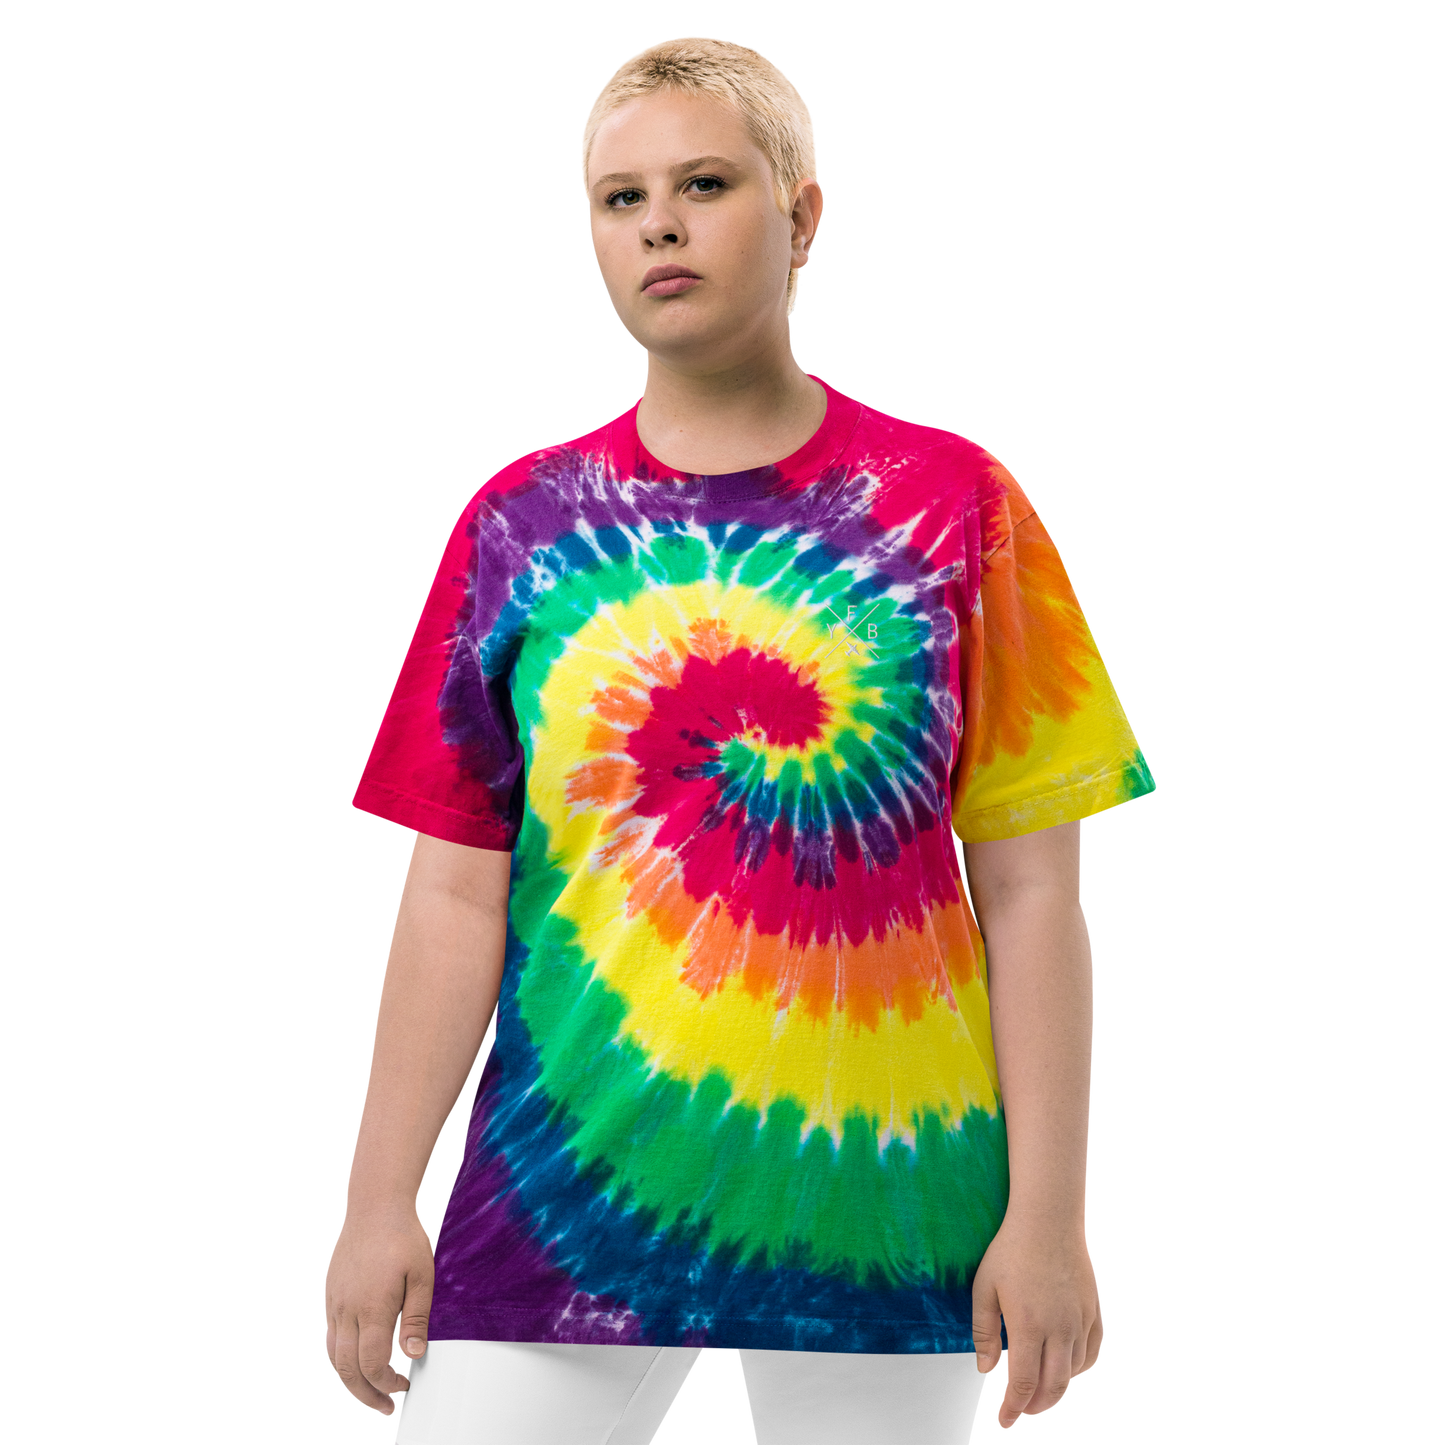 YHM Designs - YFB Iqaluit Oversized Tie-Dye T-Shirt - Crossed-X Design with Airport Code and Vintage Propliner - White Embroidery - Image 01